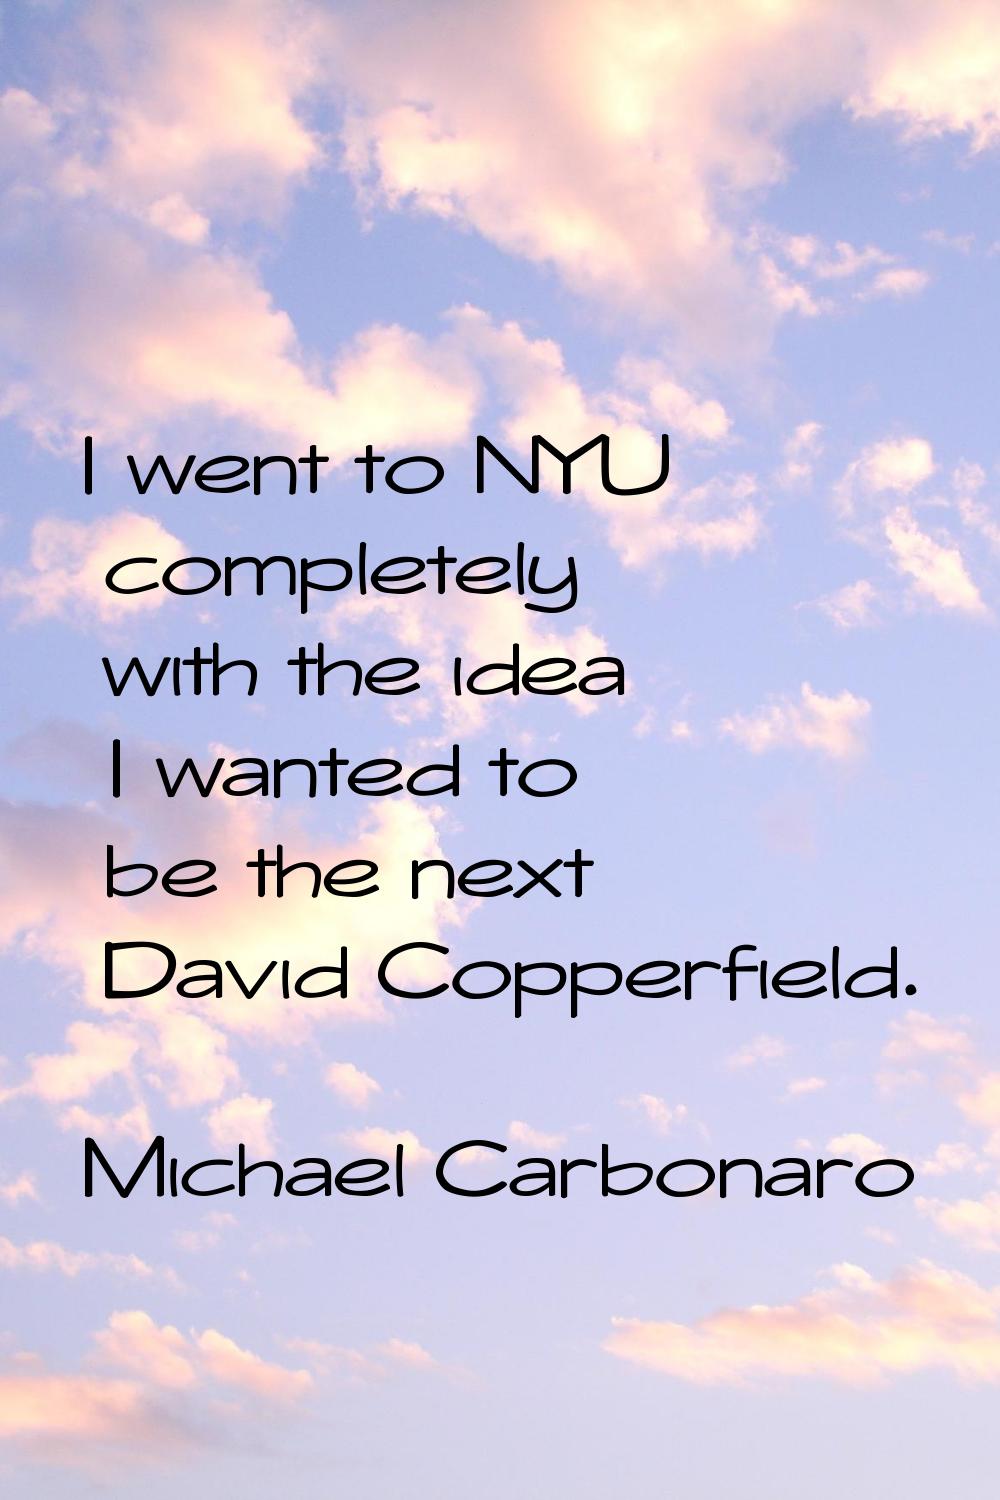 I went to NYU completely with the idea I wanted to be the next David Copperfield.